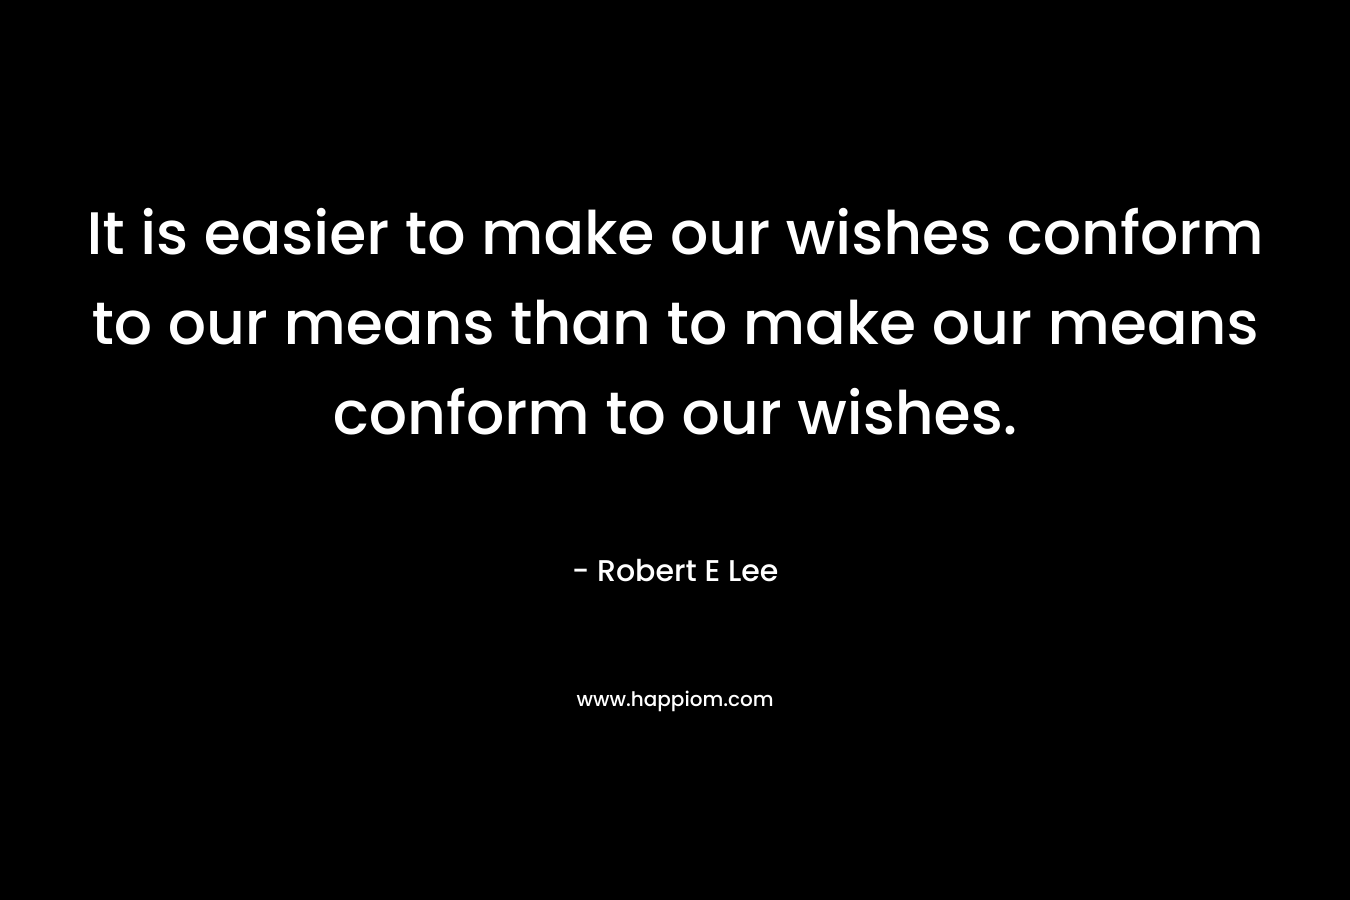 It is easier to make our wishes conform to our means than to make our means conform to our wishes. – Robert E Lee